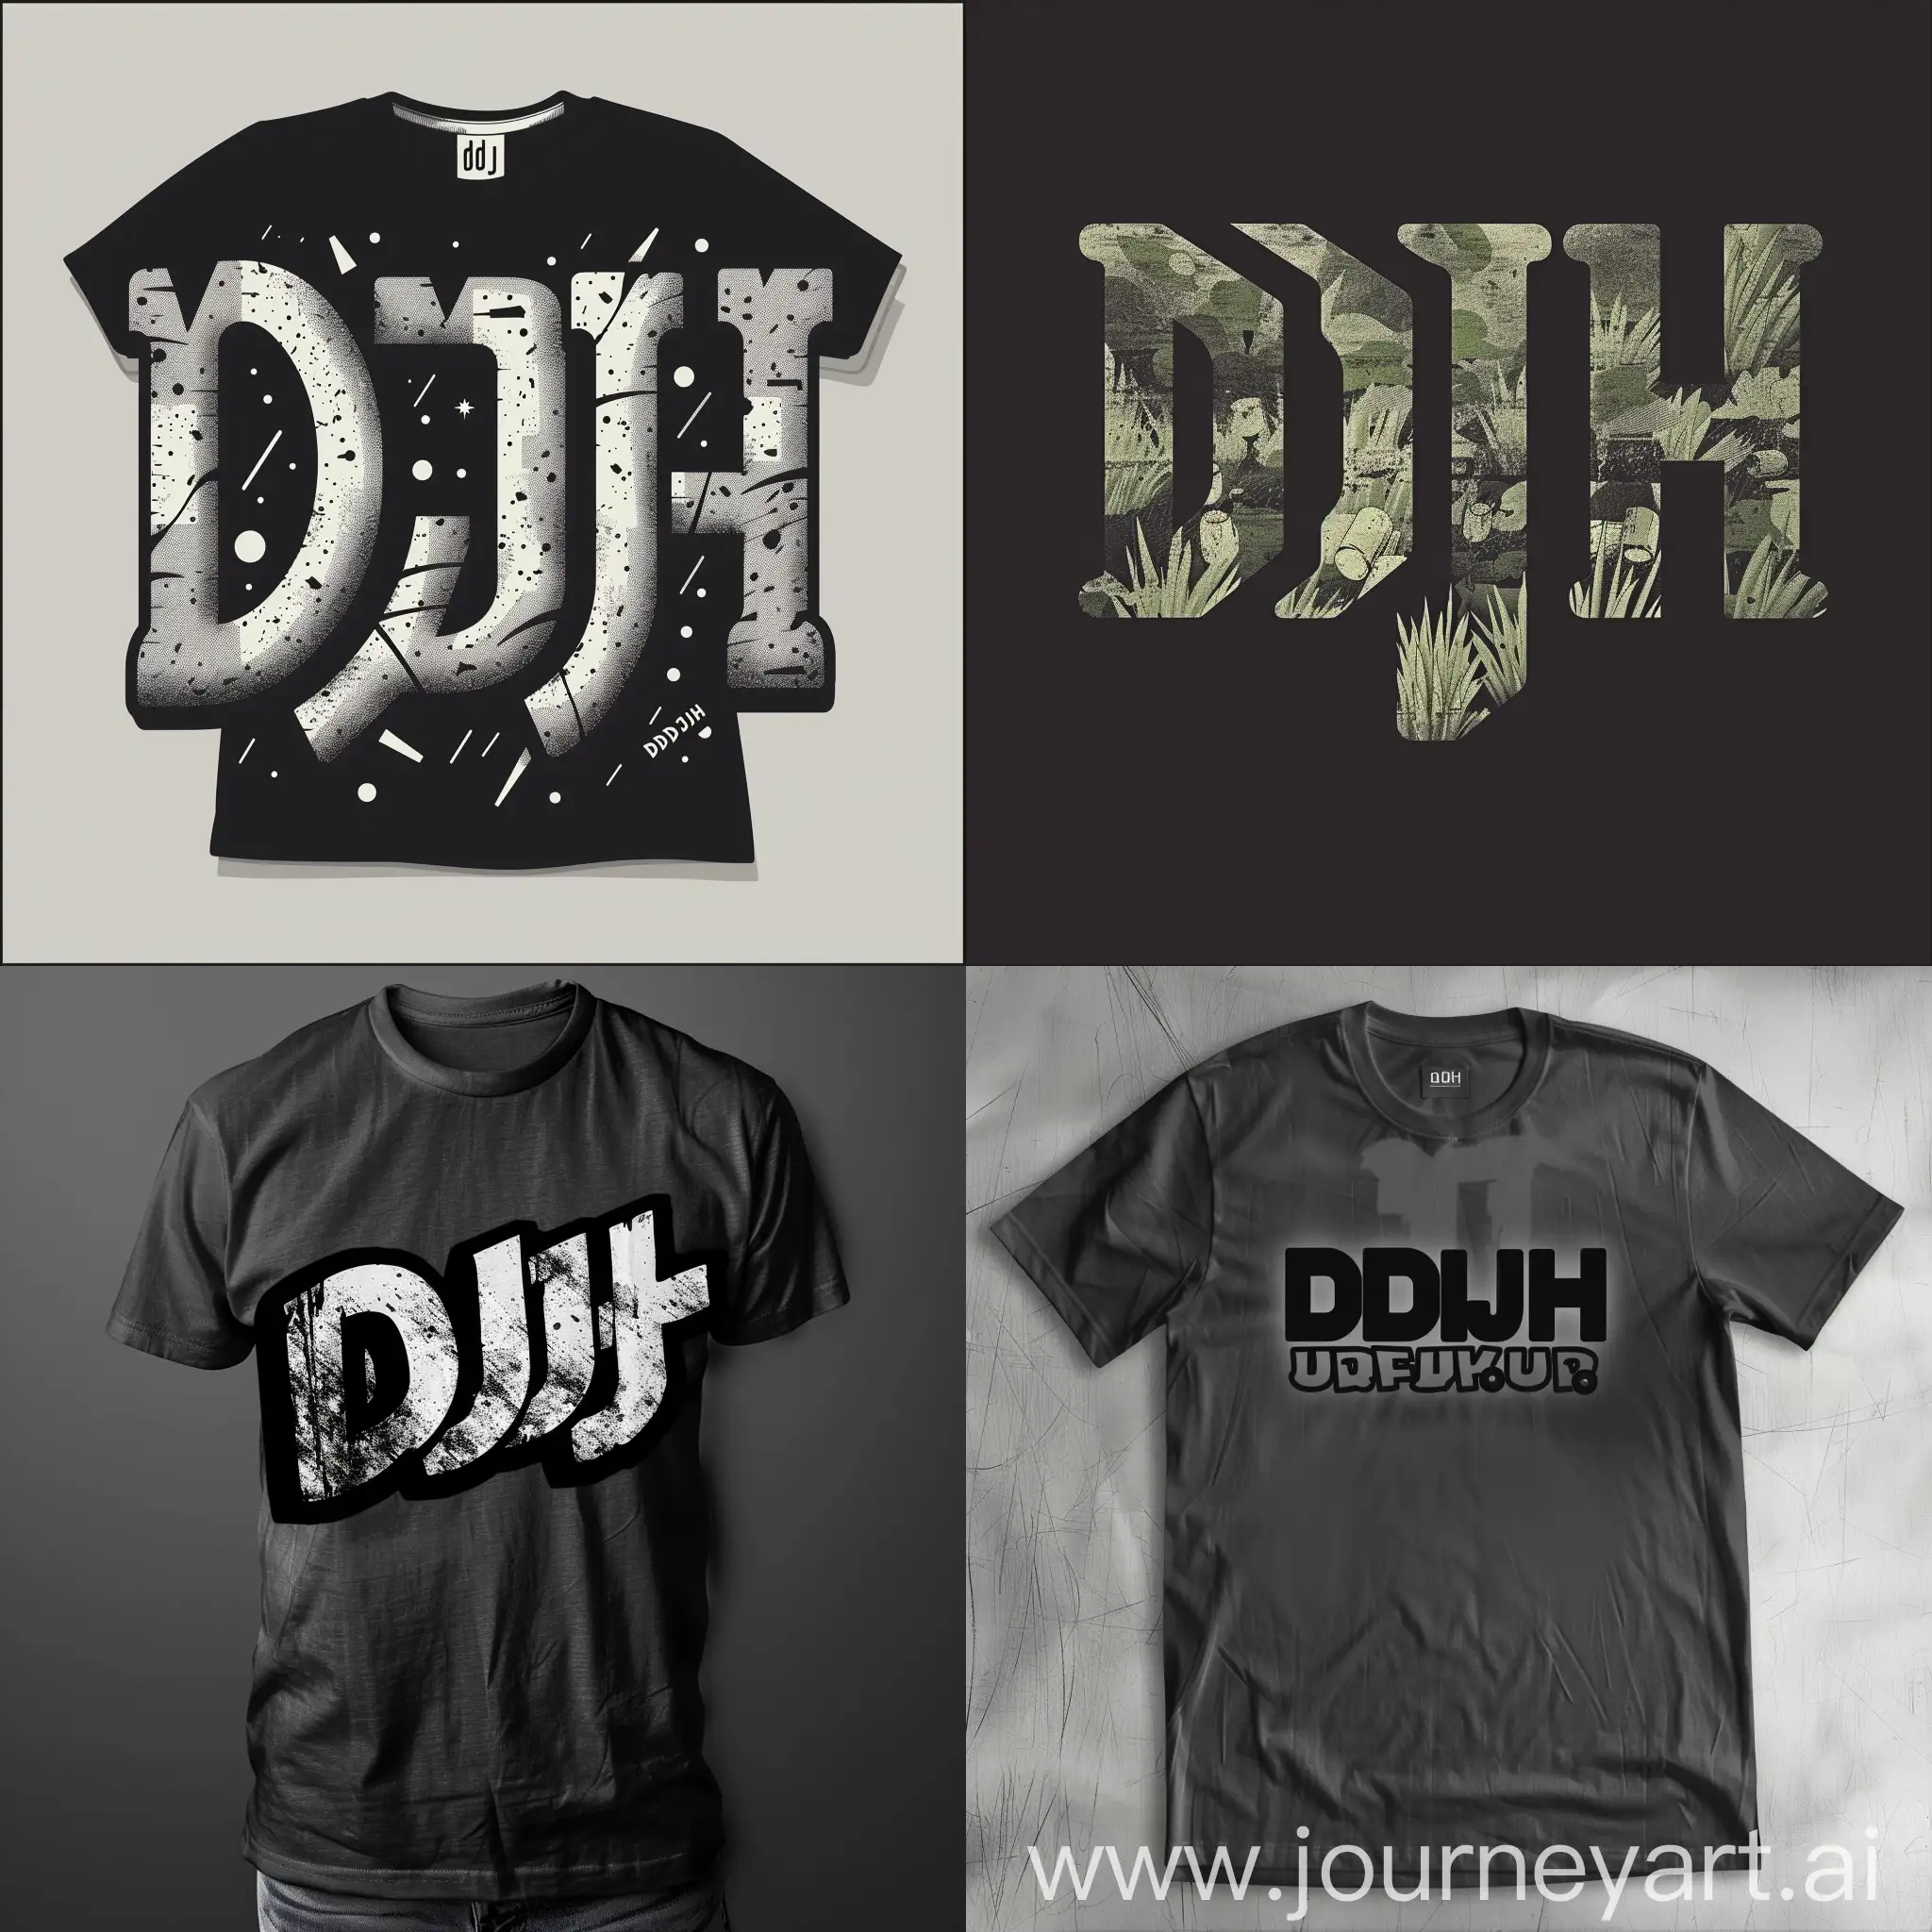 Create a icon of a word ddjh that can put on a black t-shirt